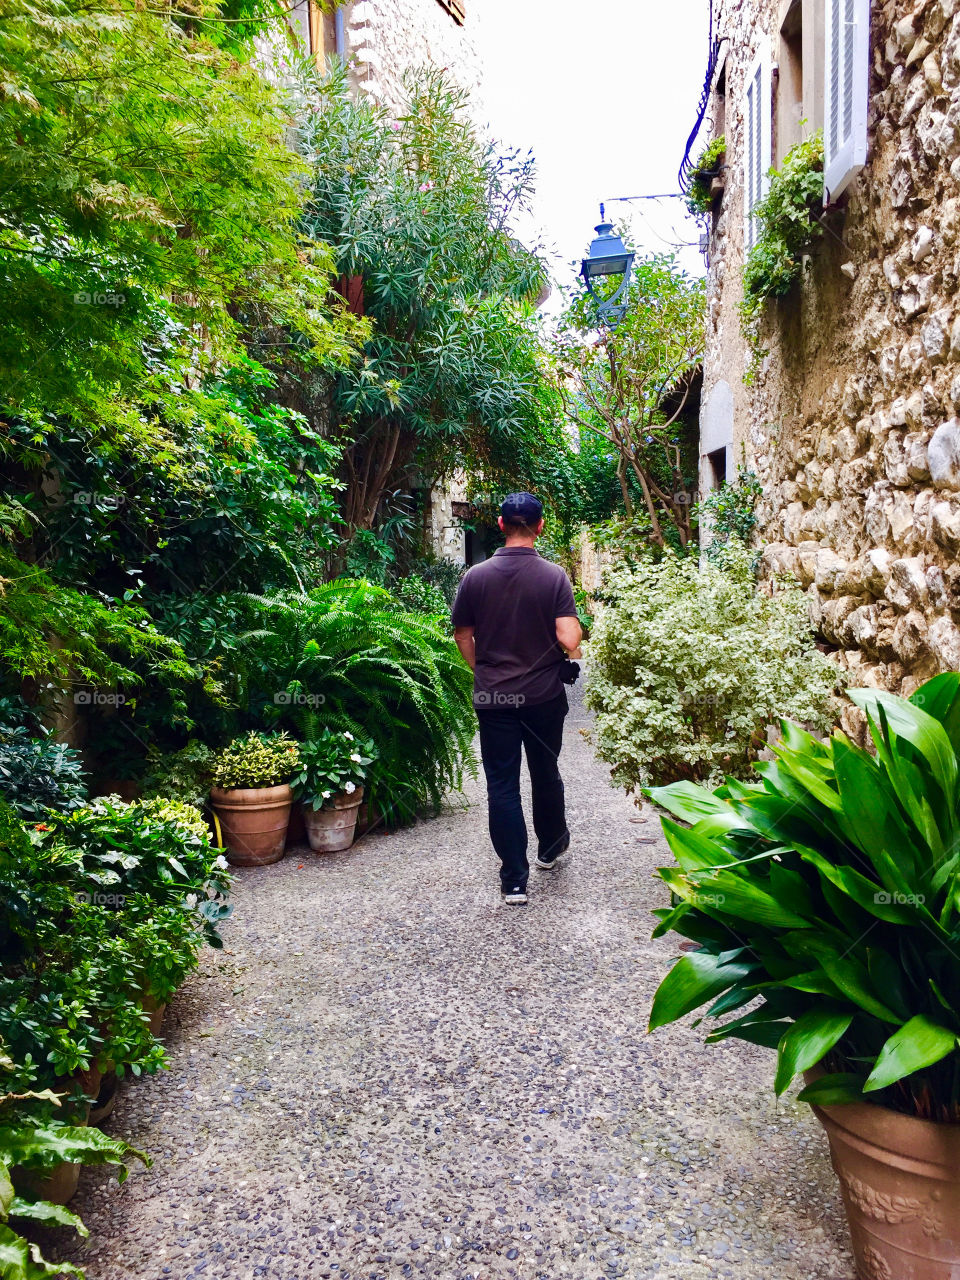 Walk through a lane filled with lush plants in an historic hilltop village in France